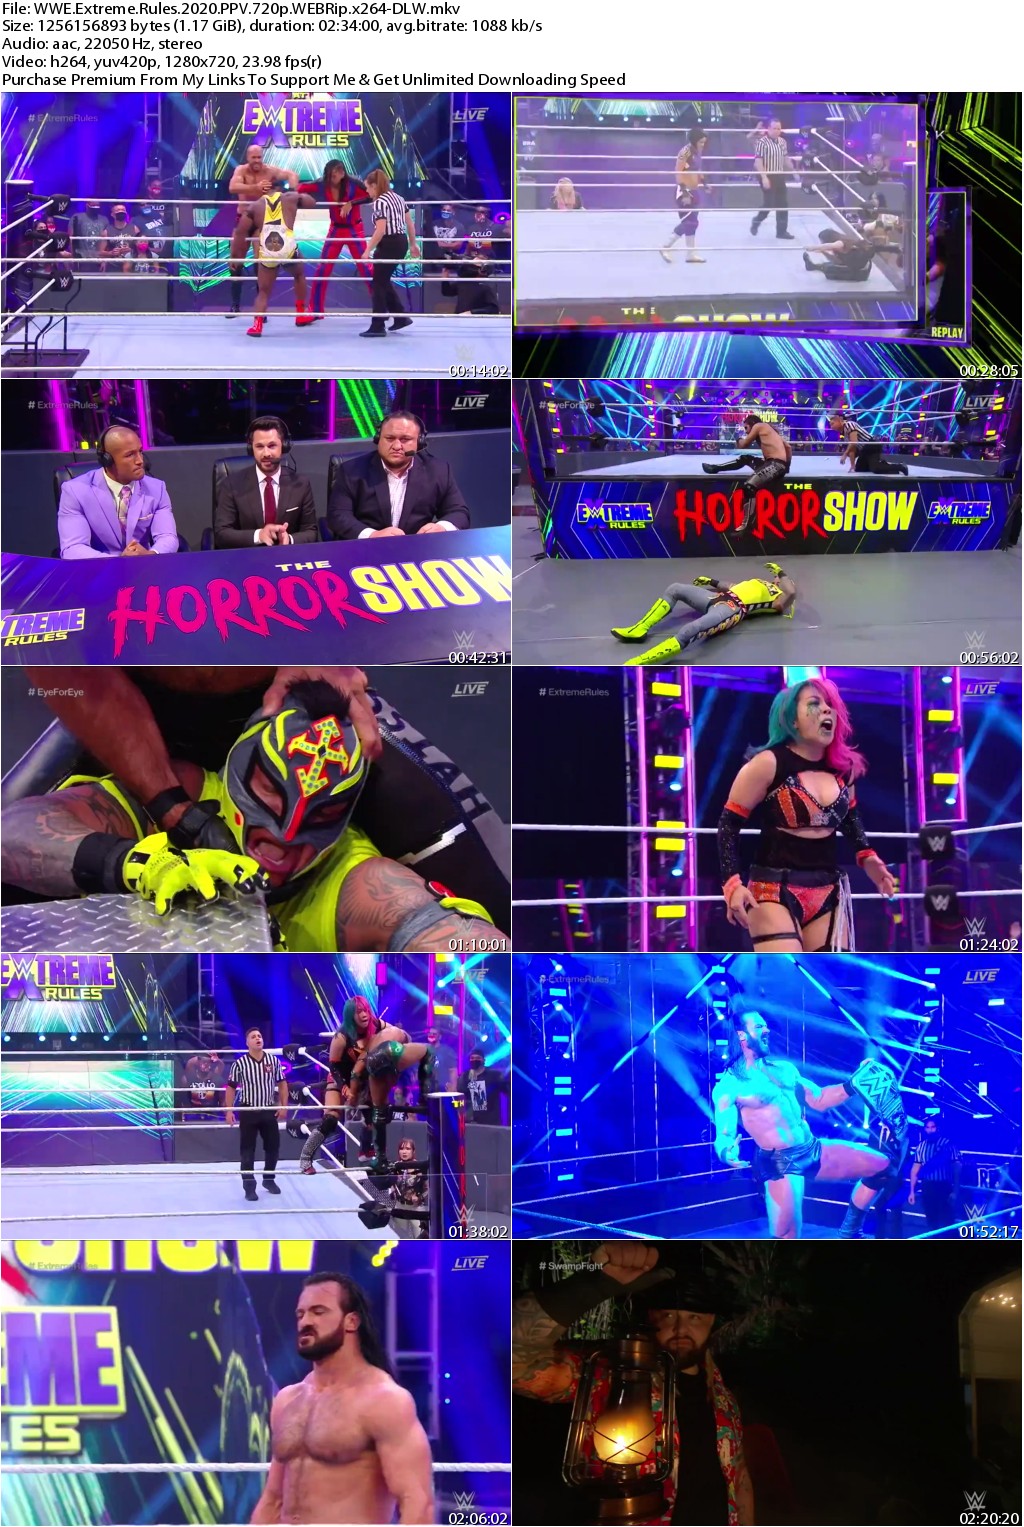 WWE Extreme Rules 2020 PPV 720p WEBRip x264-DLW